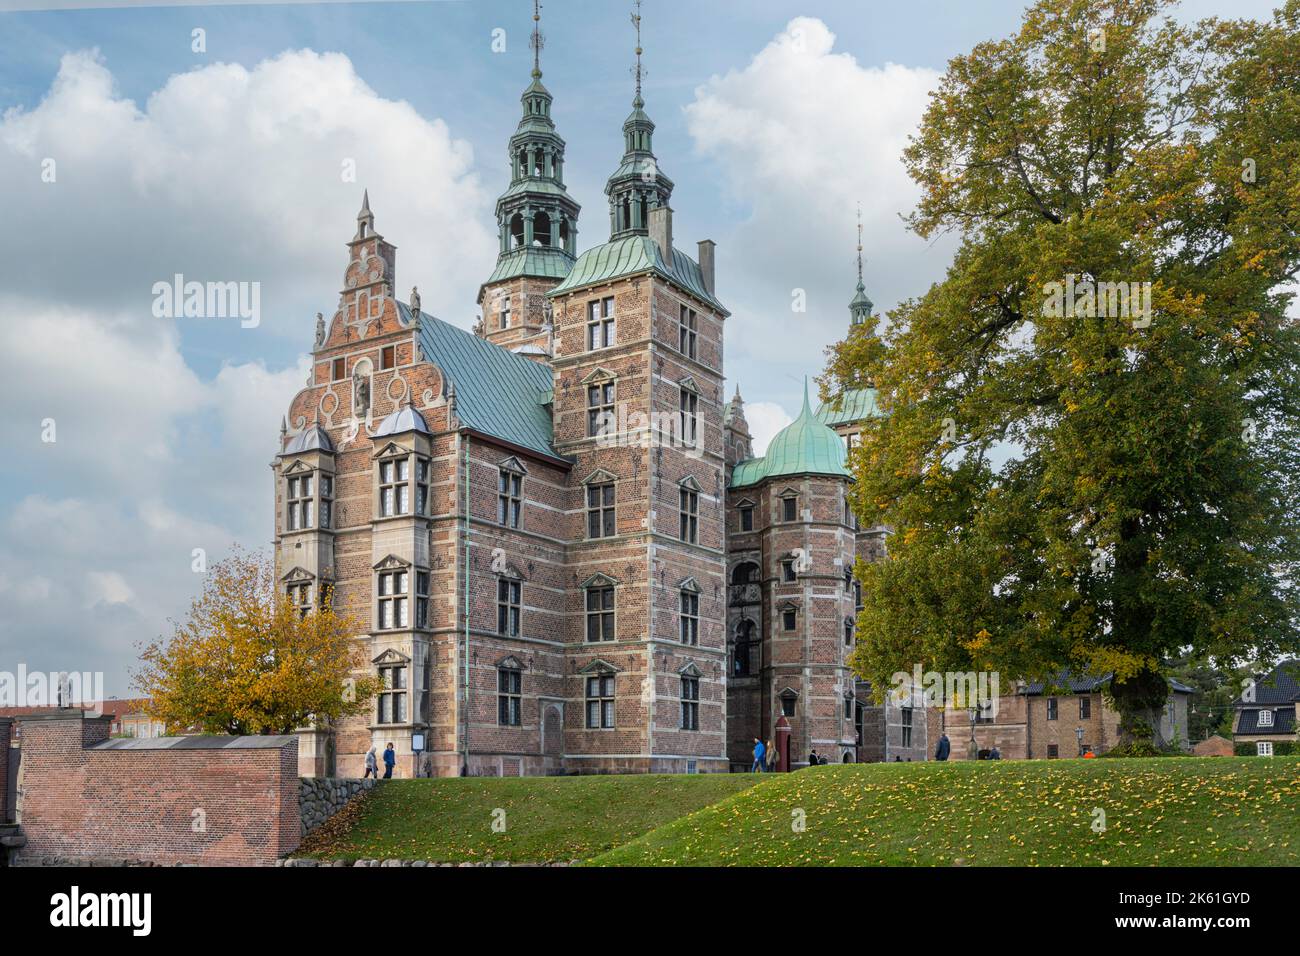 Copenhagen, Denmark. October 2022. View of Rosenborg Castle. A Dutch Renaissance Palace with gardens, guided tours and museum housing the crown jewels Stock Photo